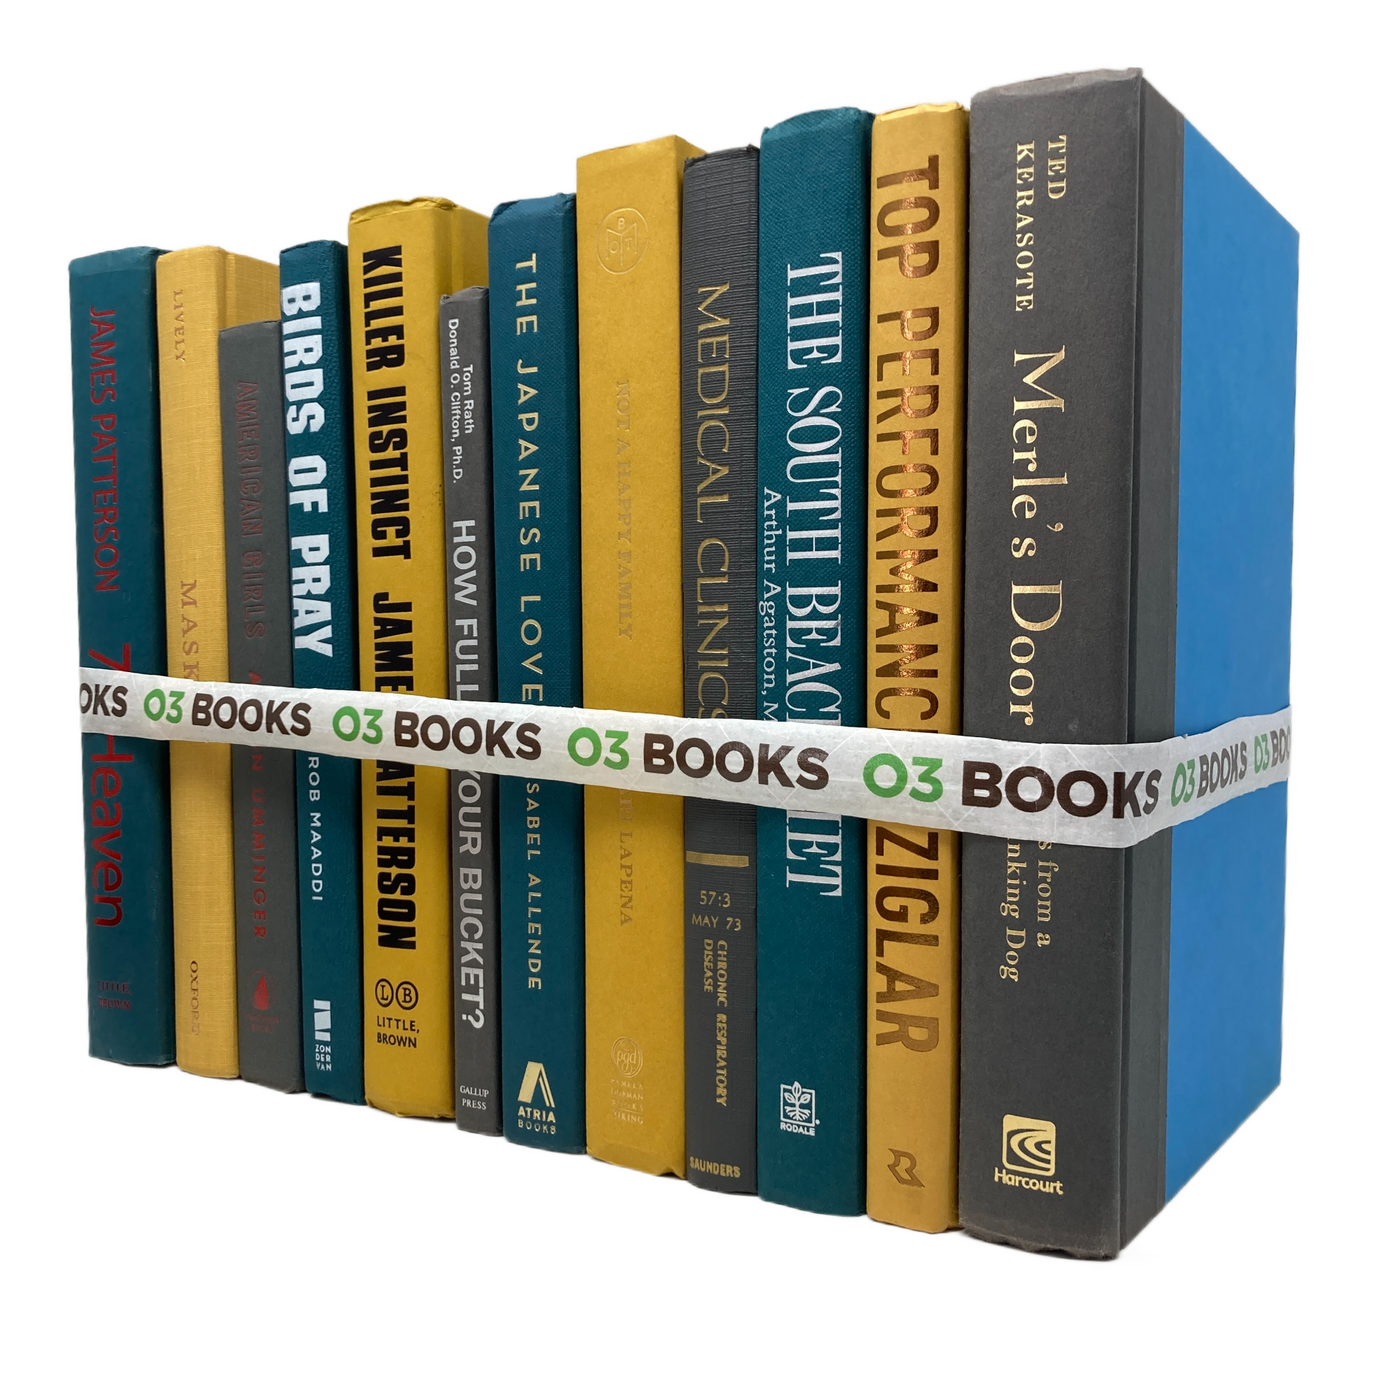 Mustard Mist Decorative Books Teal, Yellow and Gray